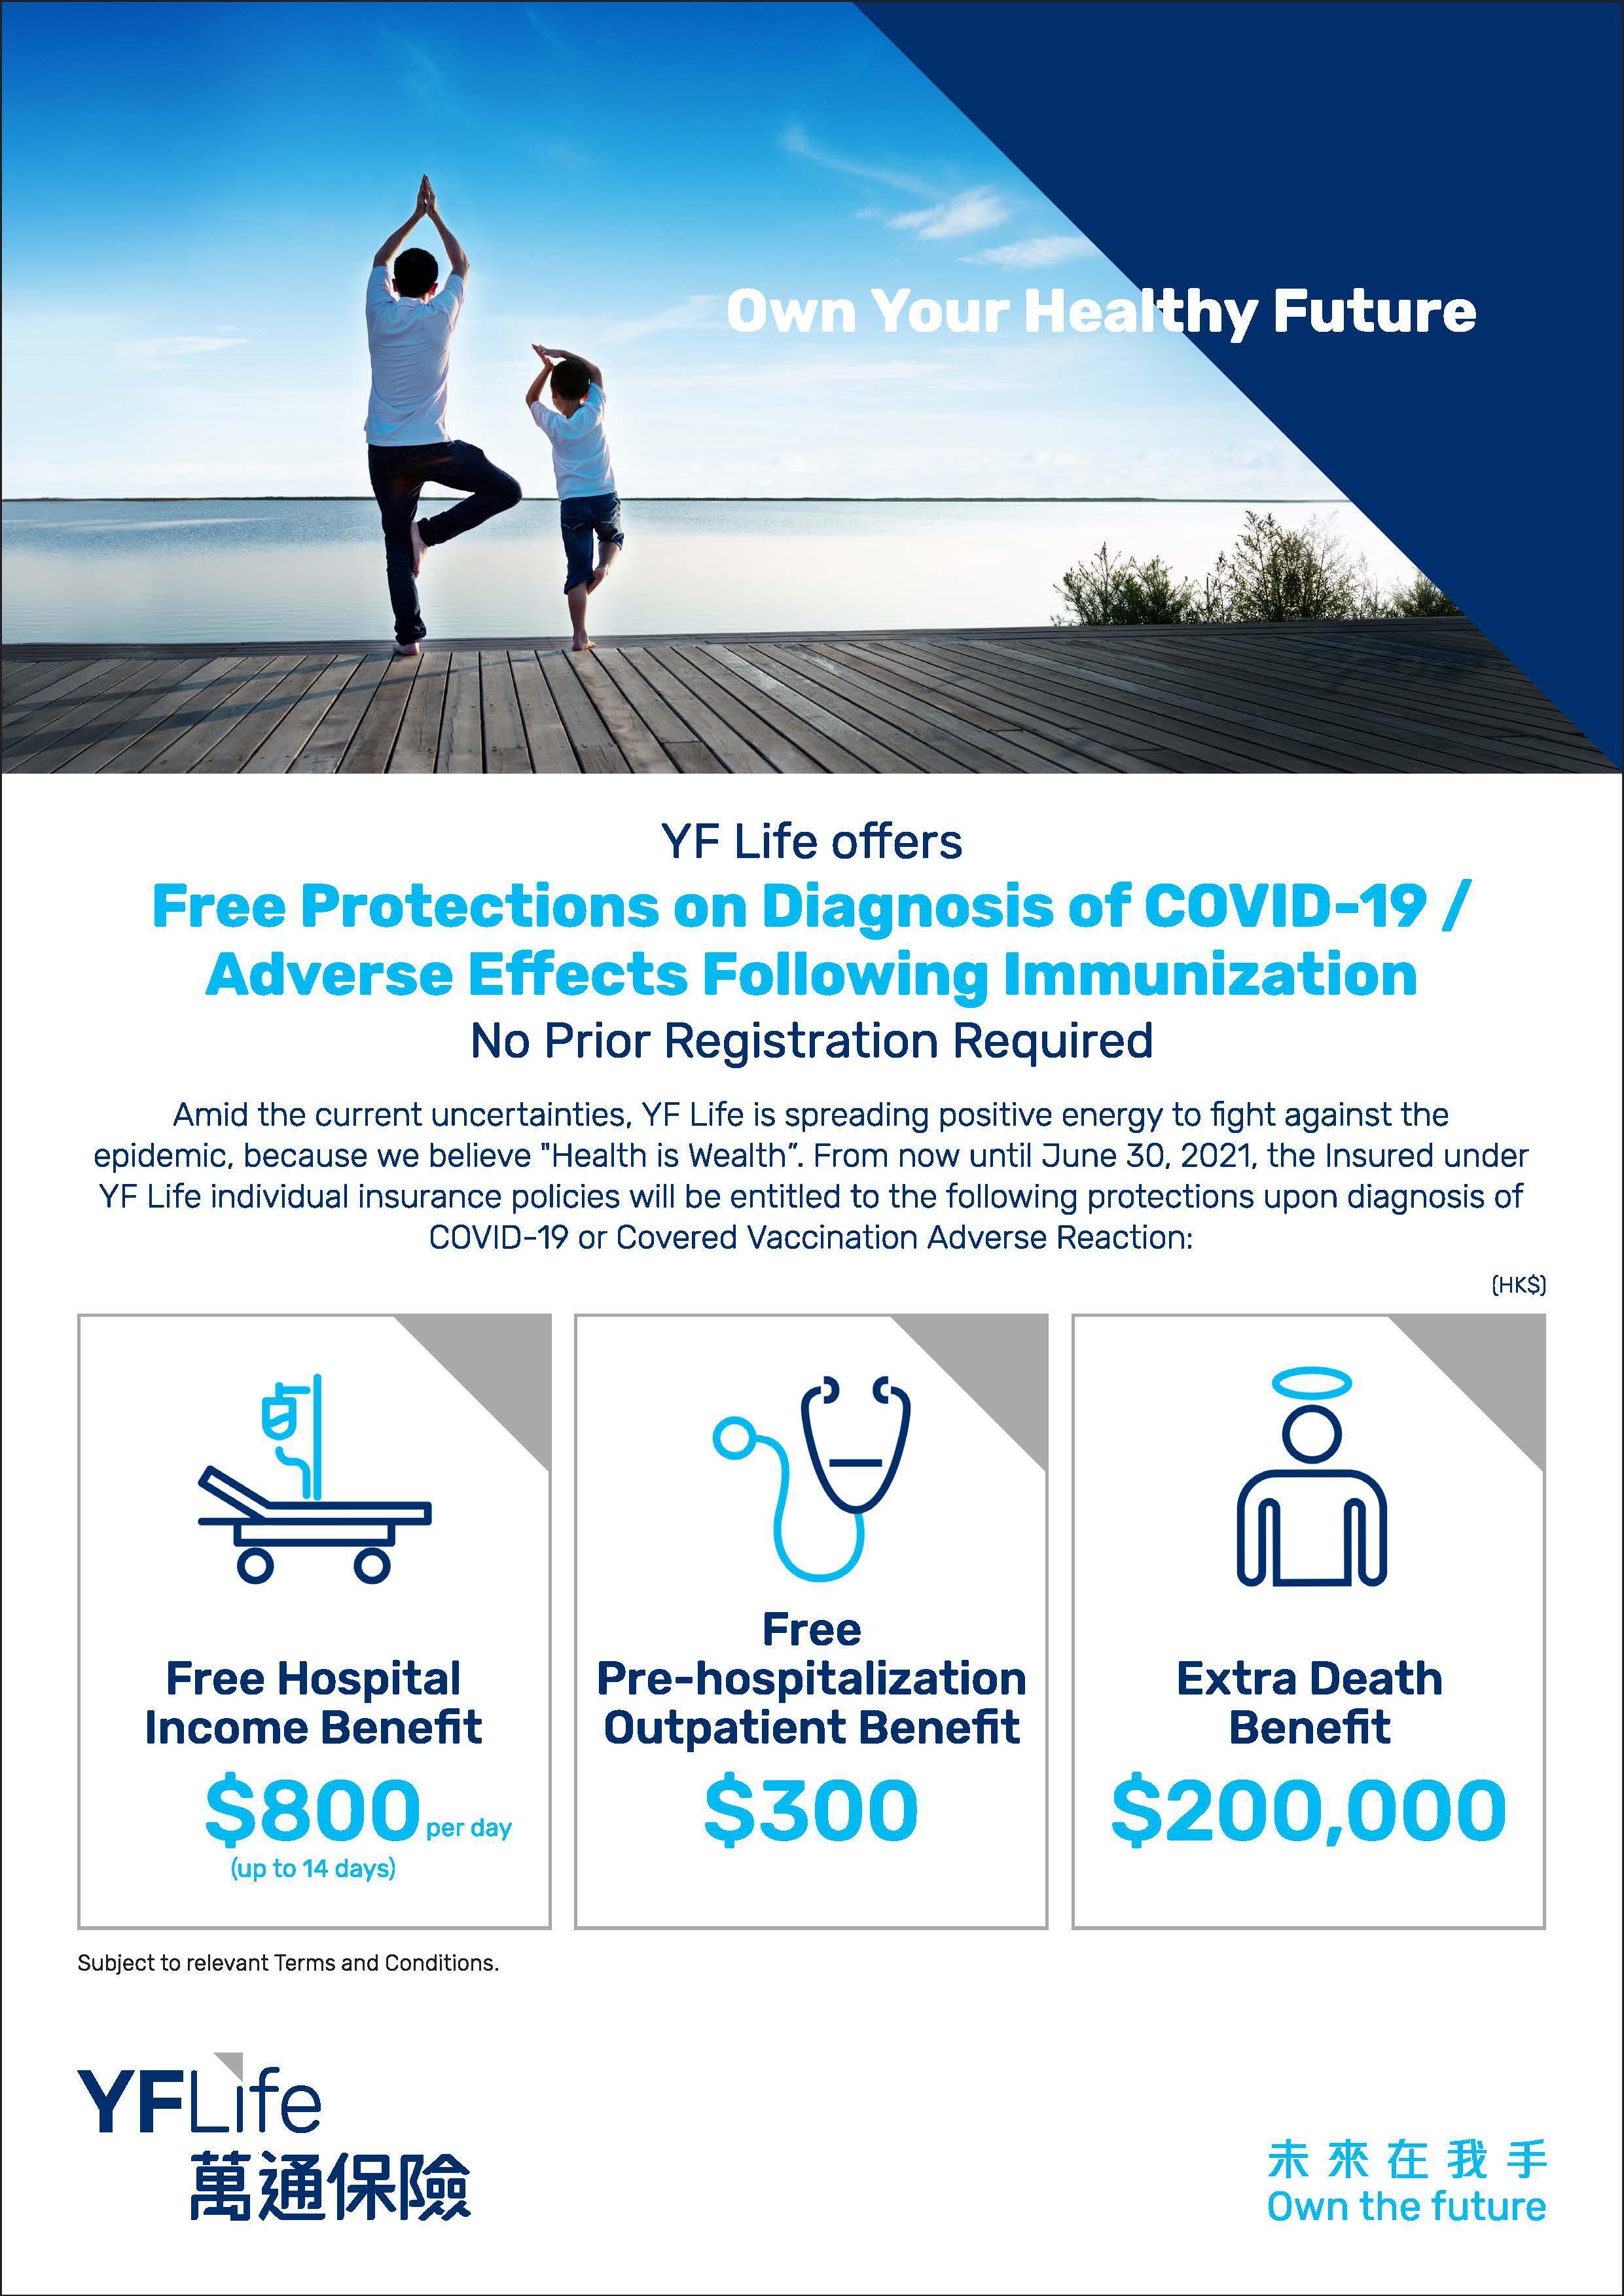 YF Life presents Free Protections on Diagnosis of COVID-19 / Adverse Effects Following Immunization. 